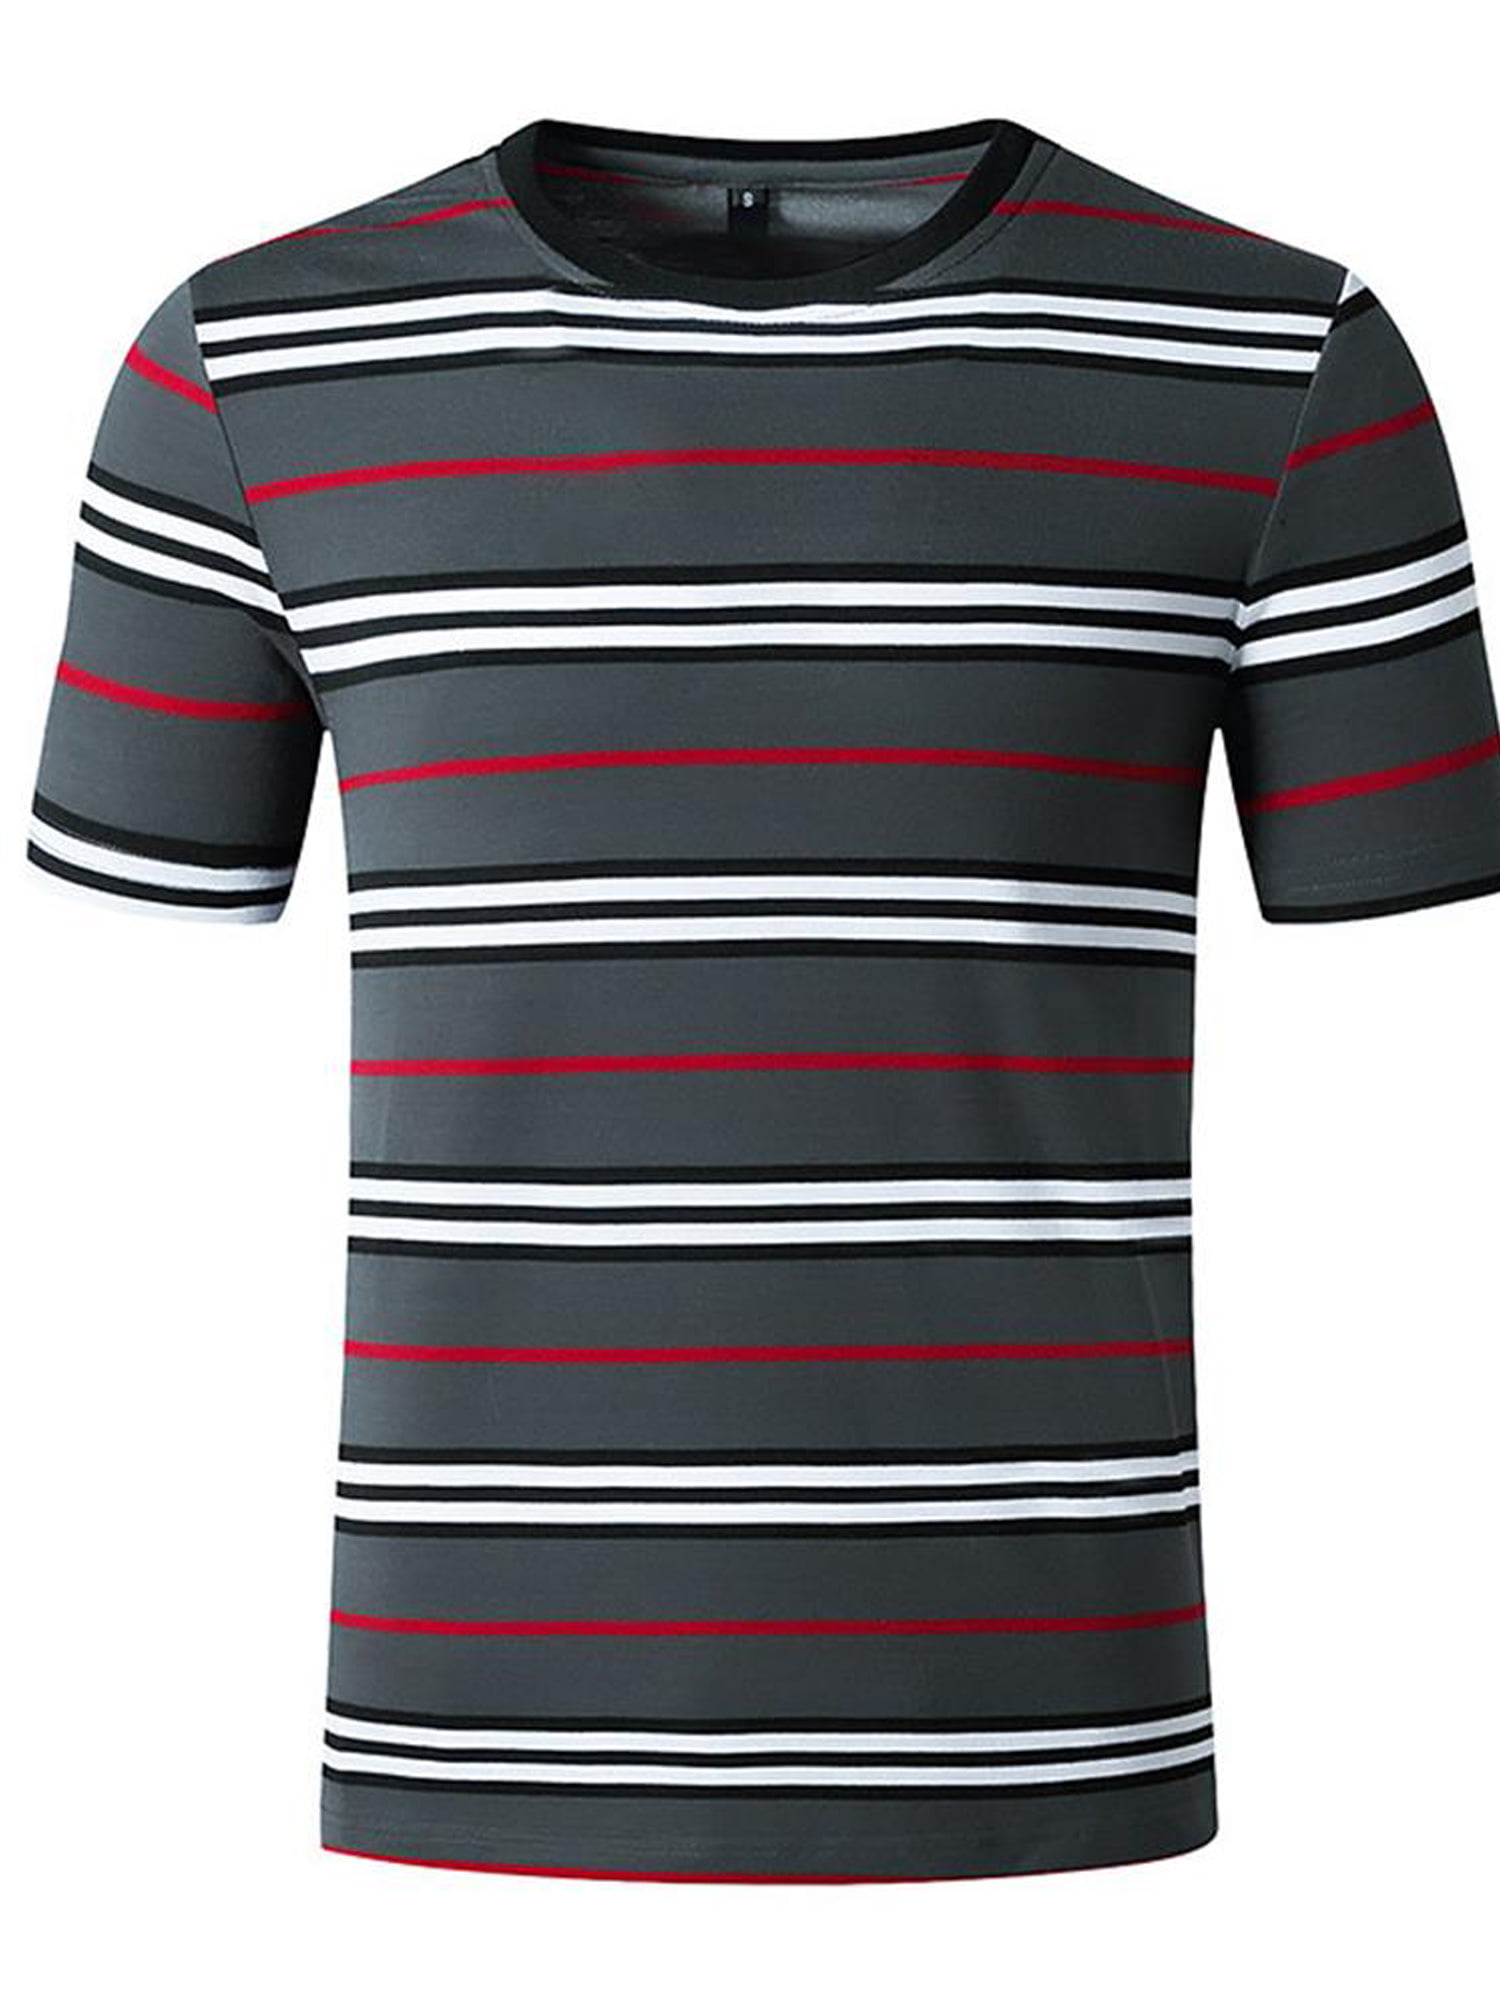 Mens T Shirts,Basic Casual Crew Neck Short Sleeve Tee Classic Graphic Stripe Top